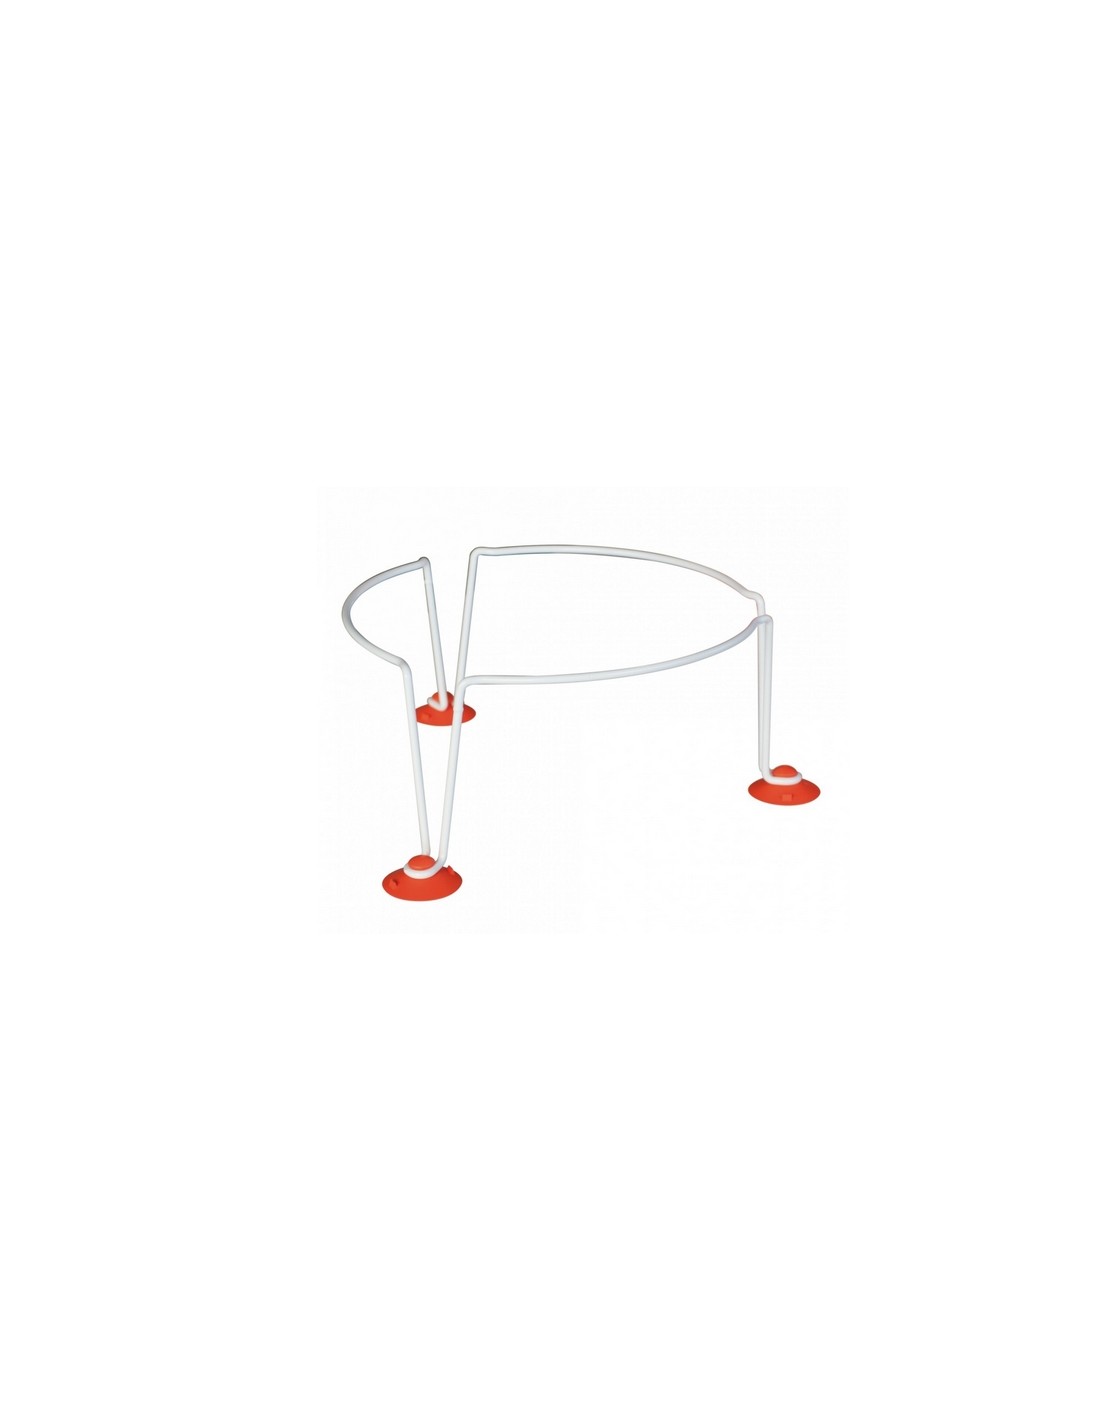 Support with centrifugal stop suction cups - For 20 litre models